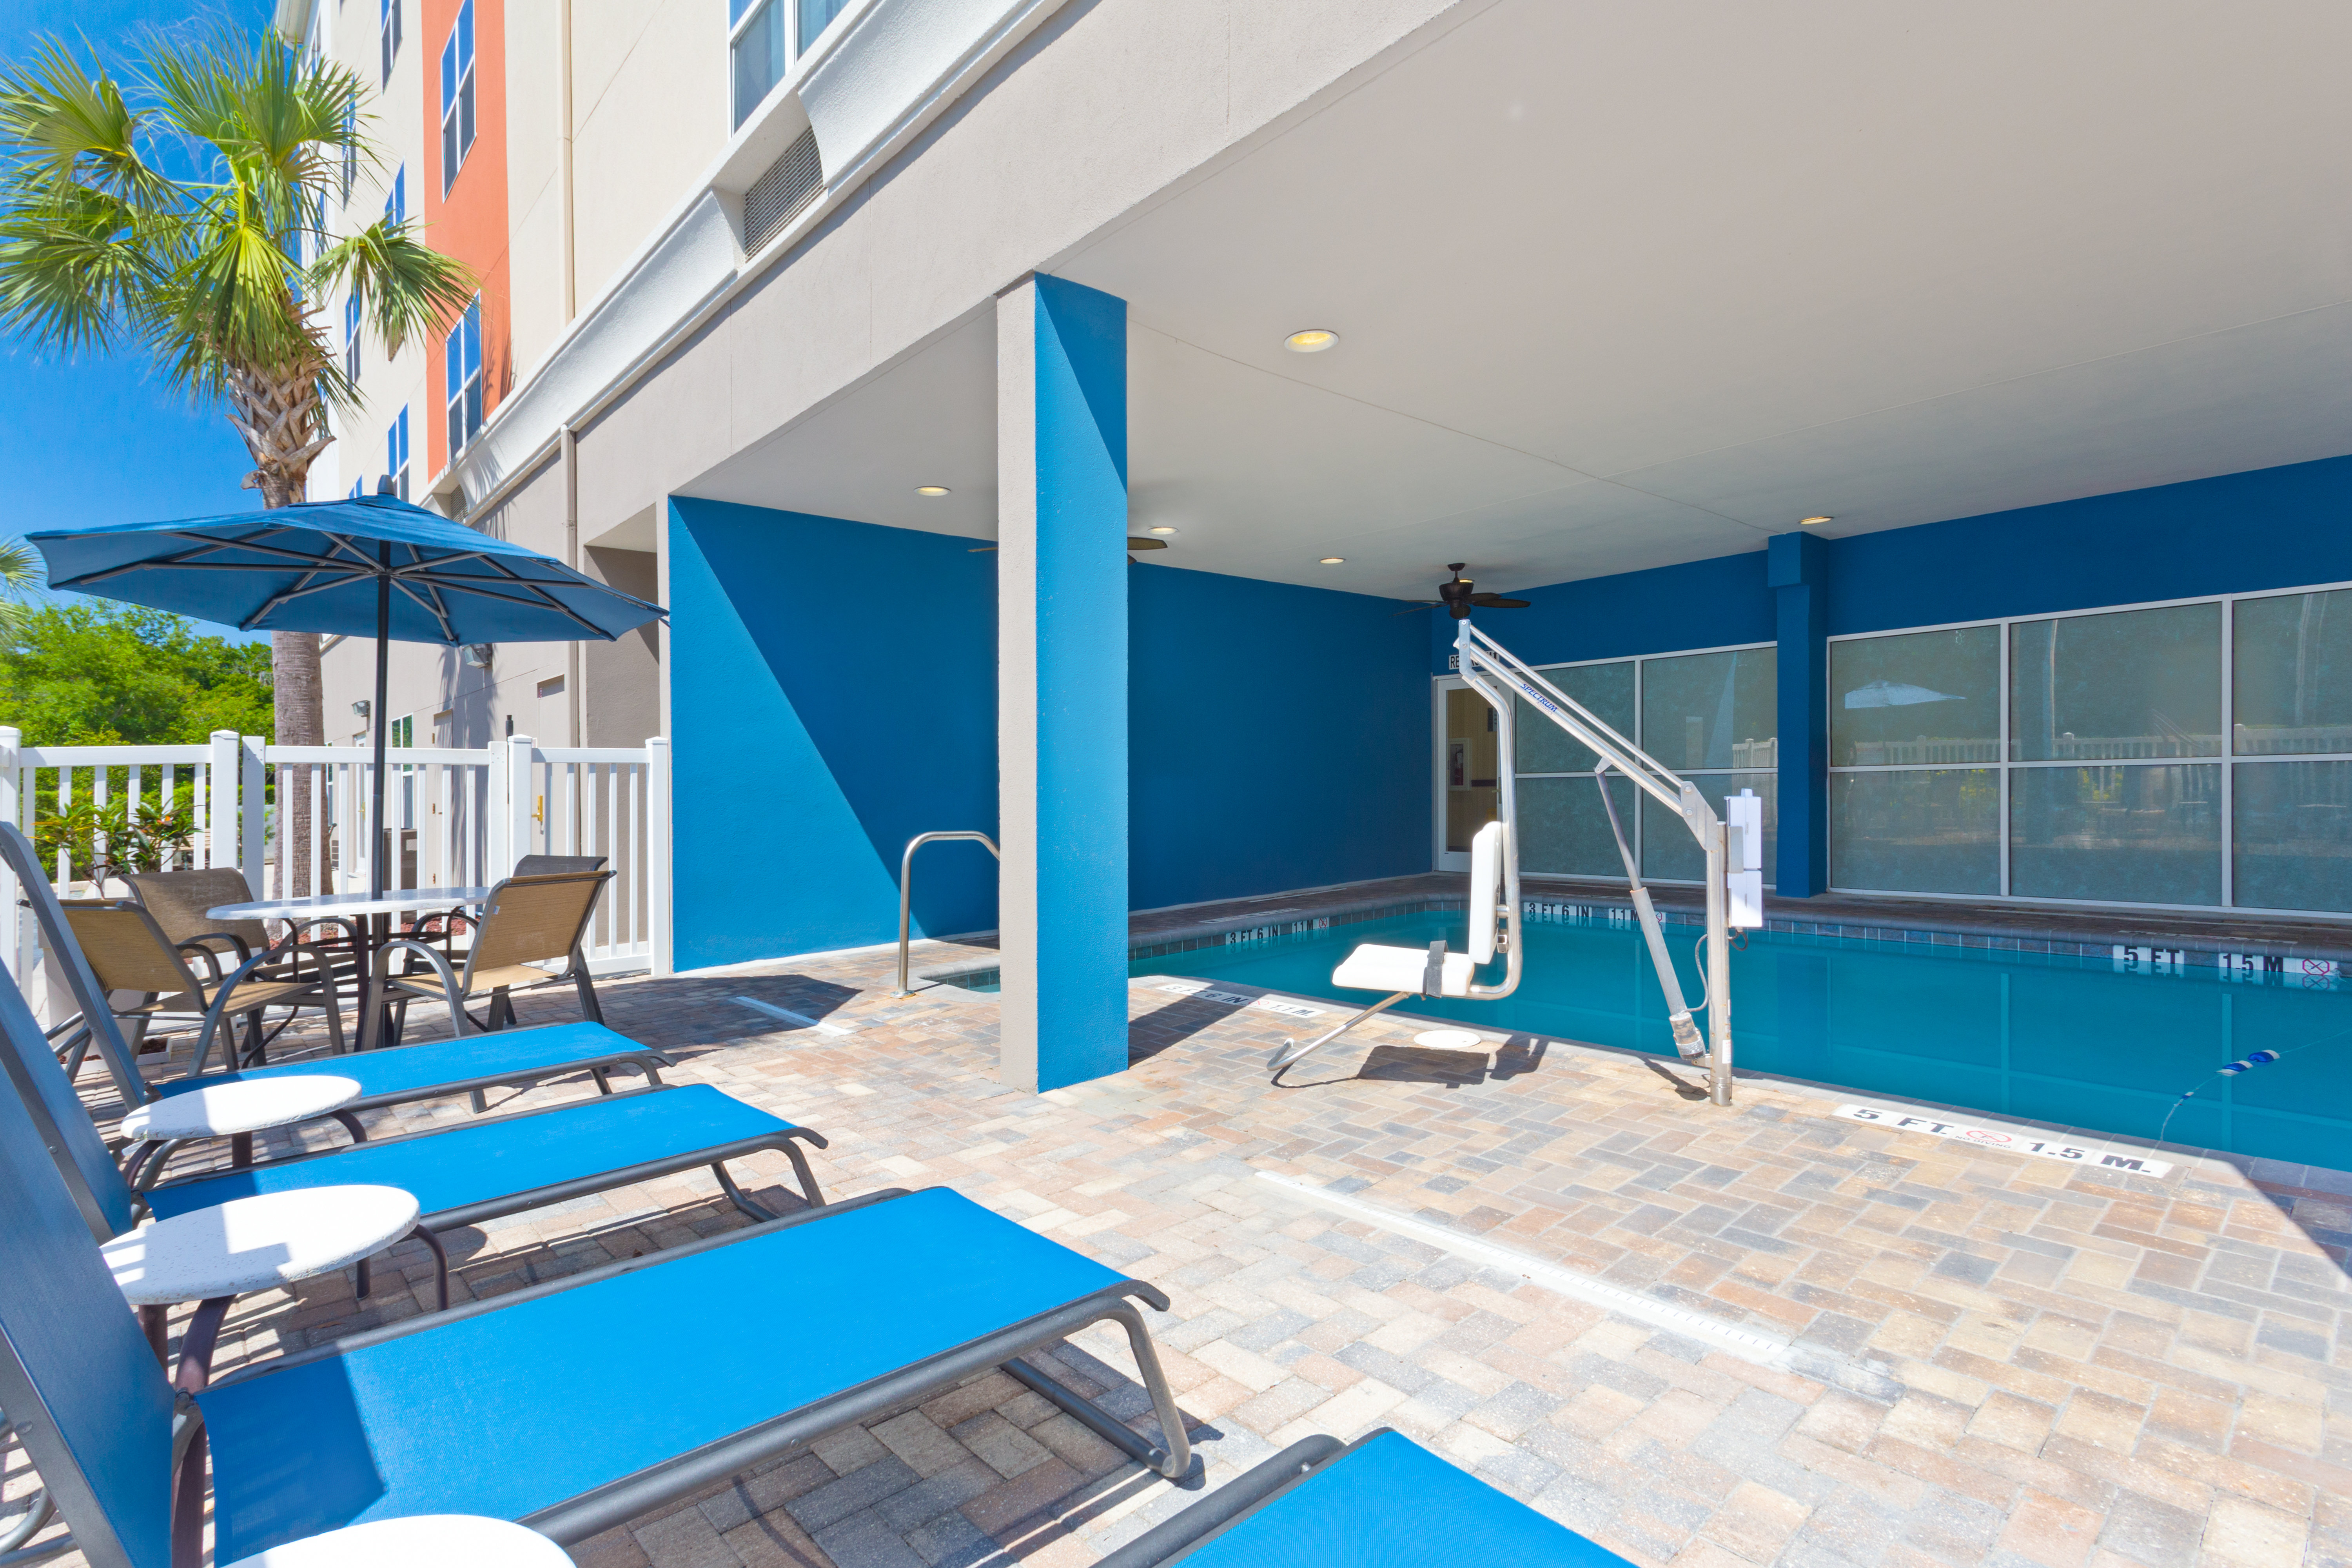 Relax and catch some rays in our all season pool area!